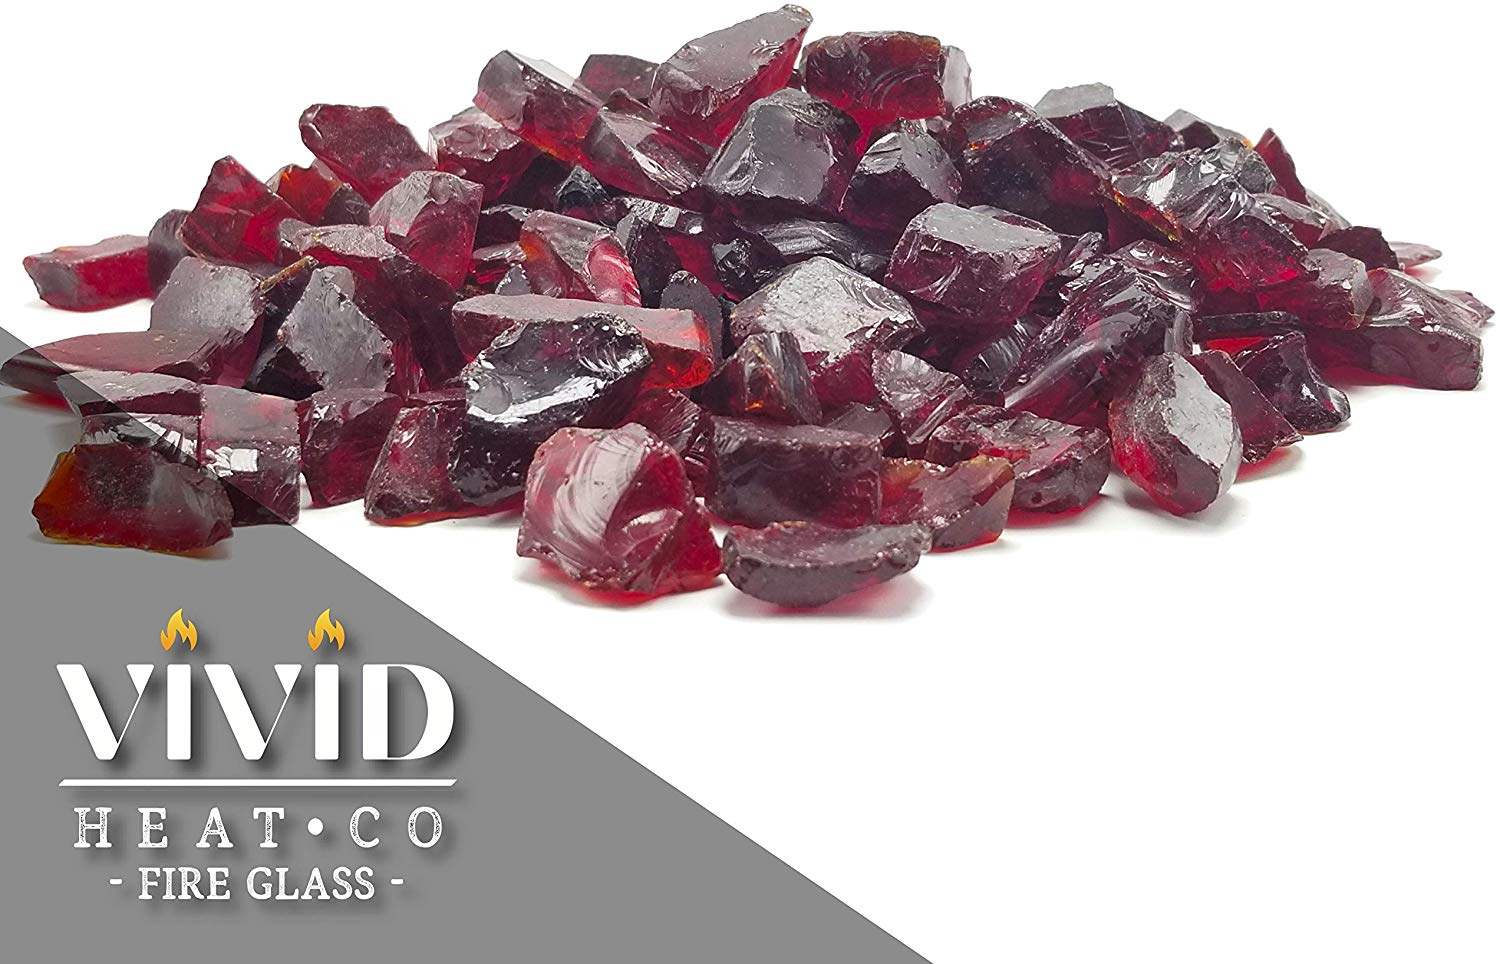 Red 1/2" - 3/4" Large Premium Fire Glass for Fireplace and Fire Pit